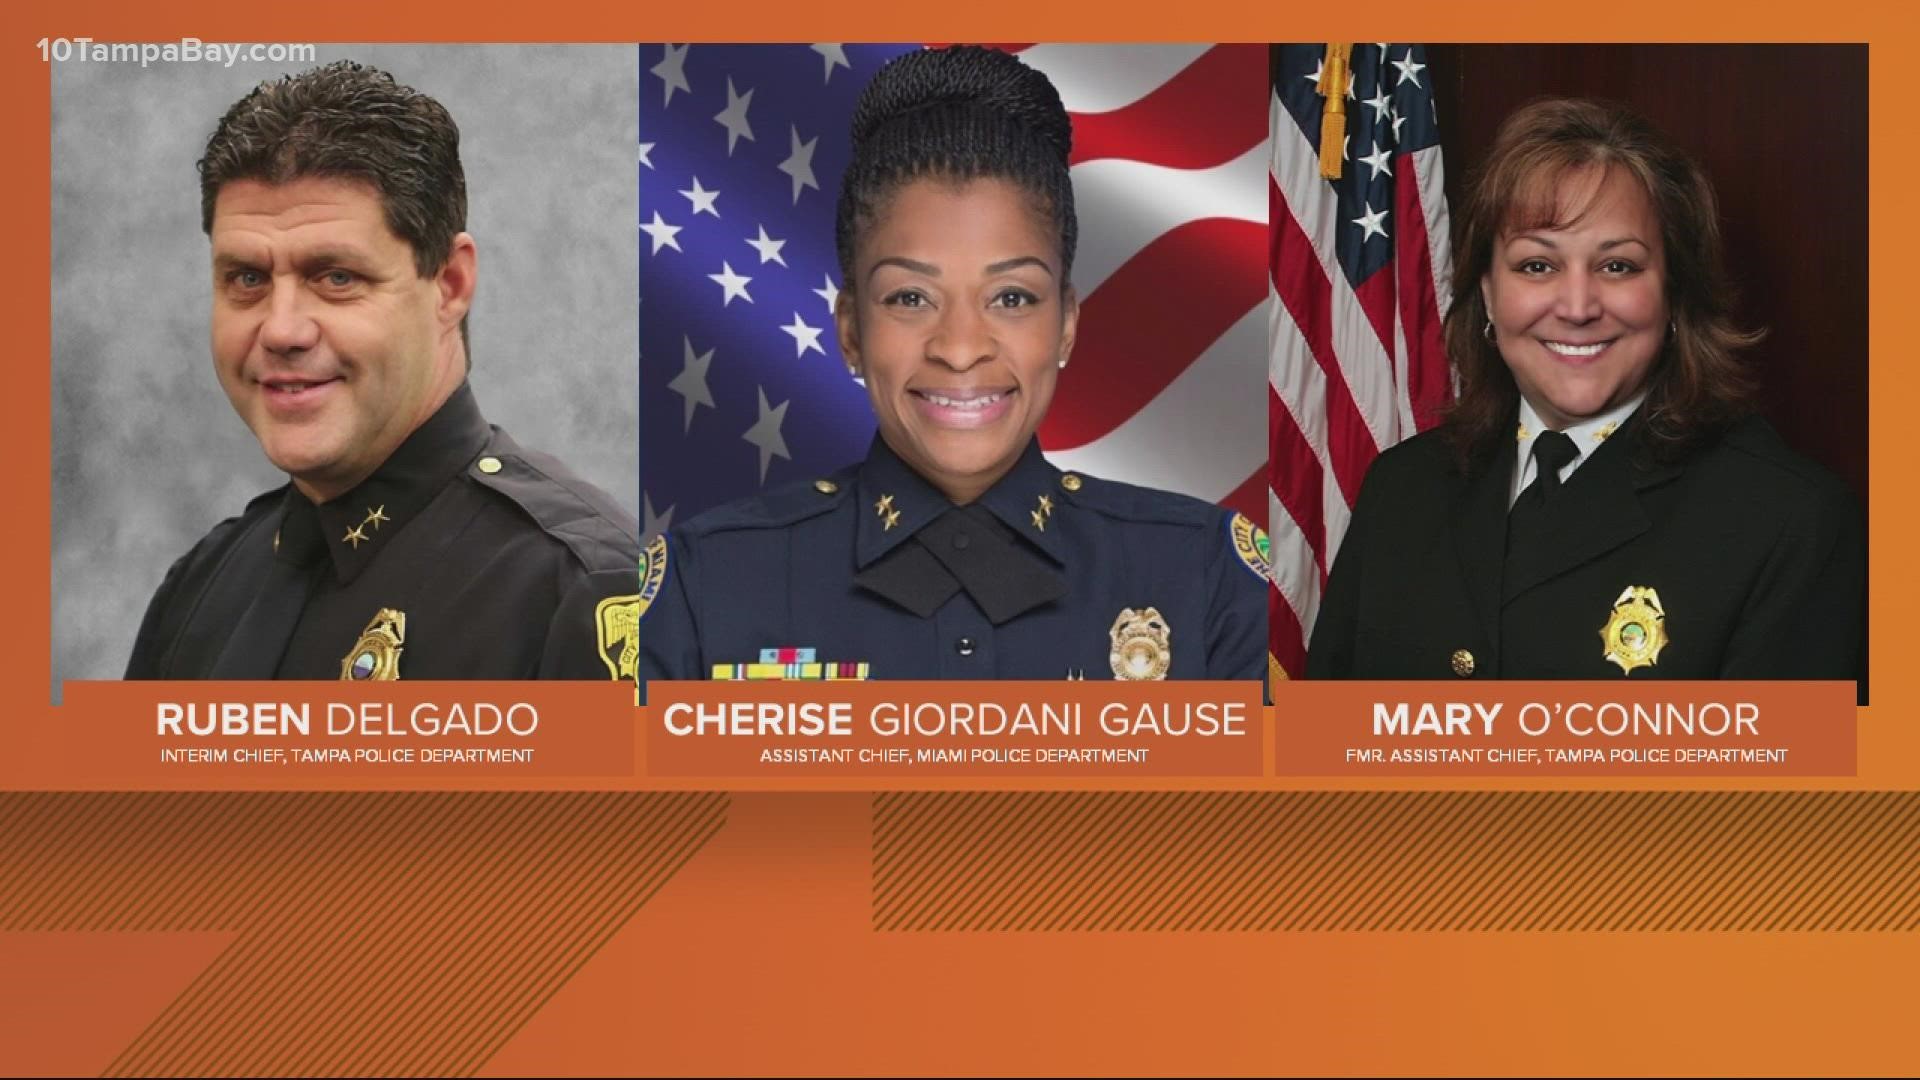 Many will be watching to see if the mayor will finally announce the city's next police chief.